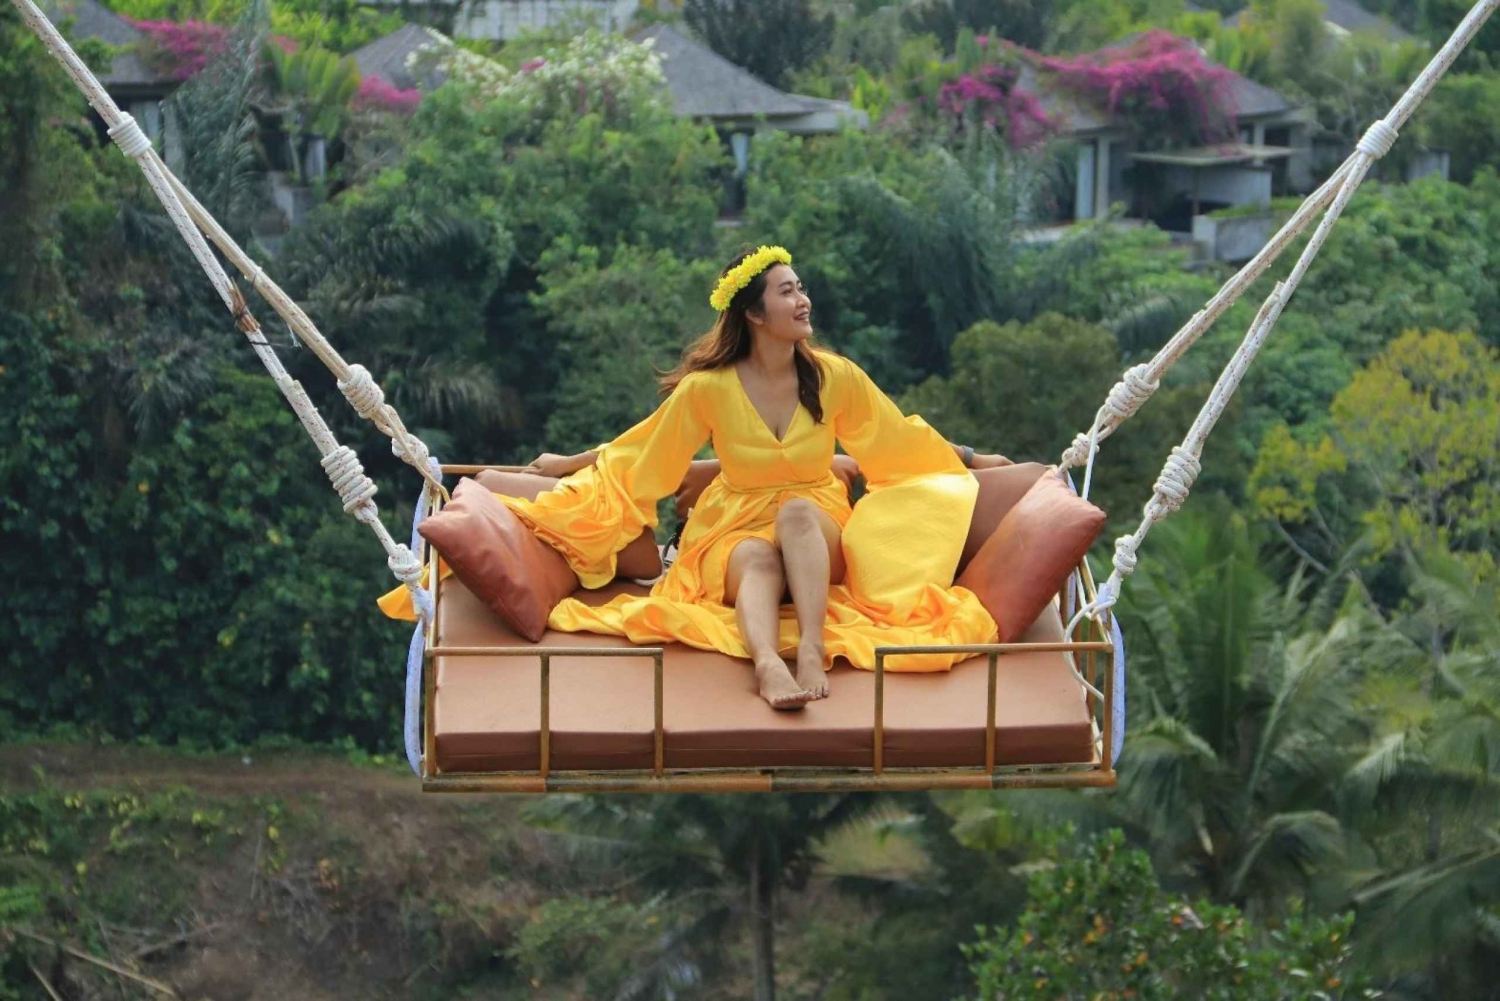 Bali Swing Experience: Unforgettable Thrills -With Transport